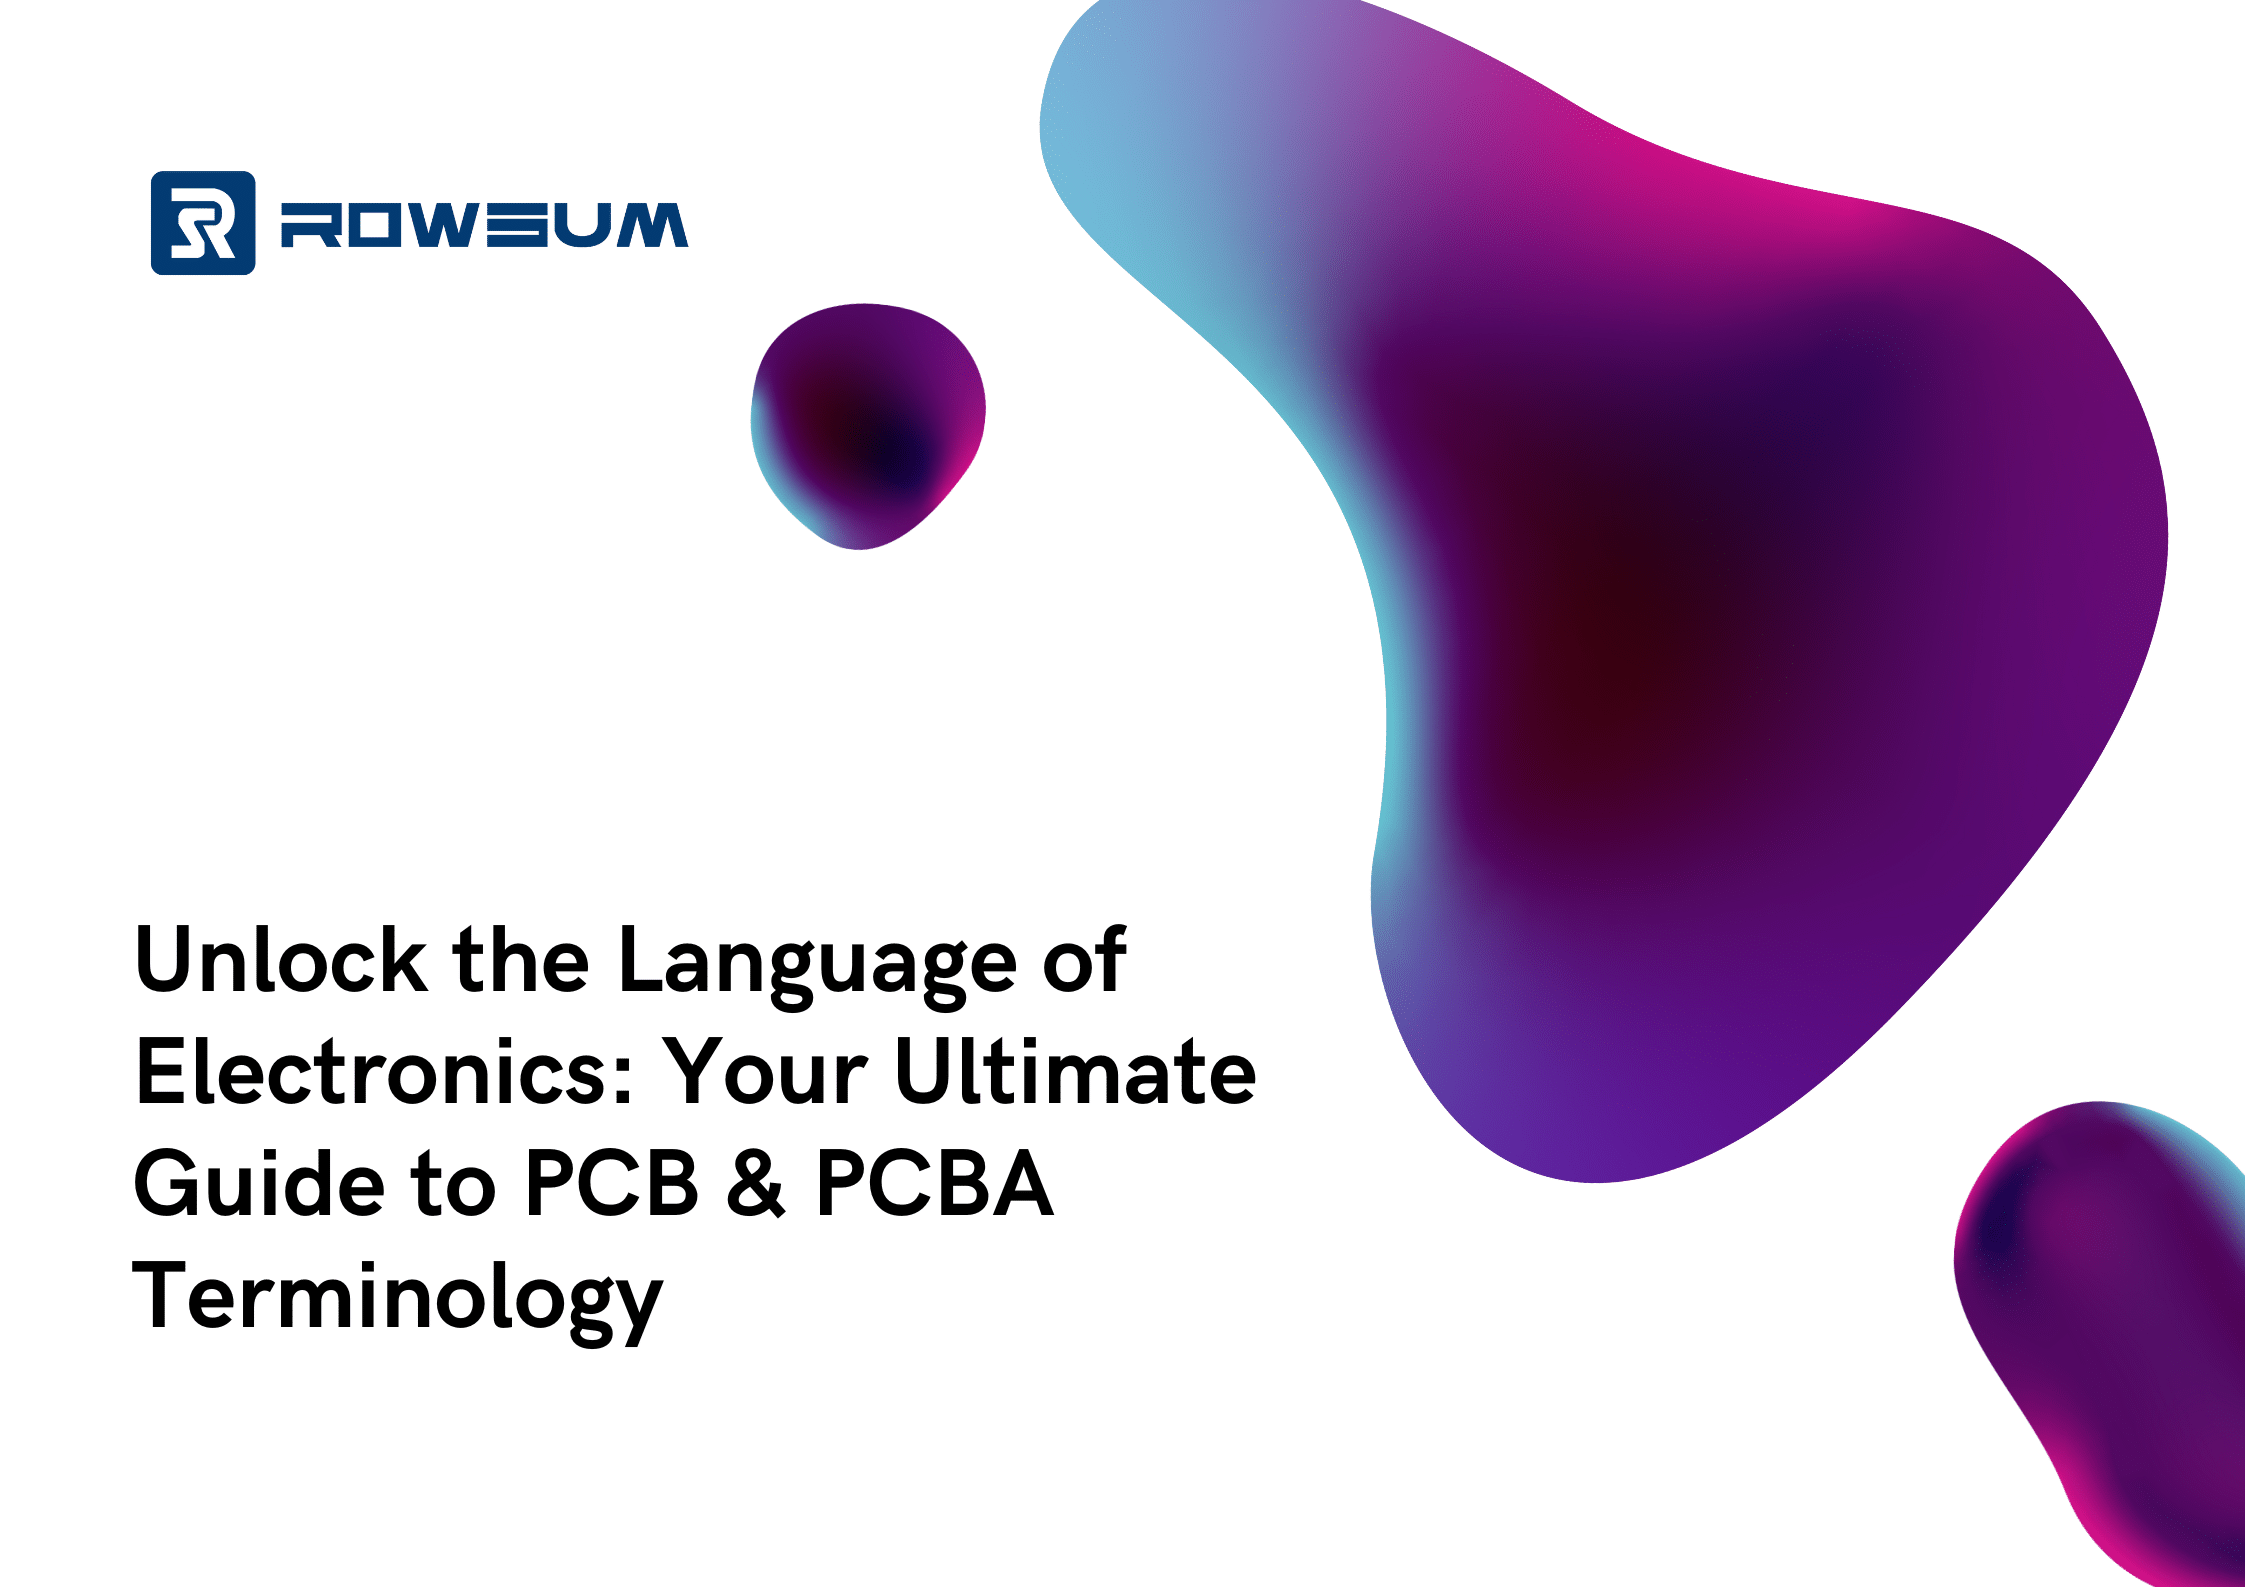 unlock the language of electronics your ultimate guide to pcb & pcba terminology